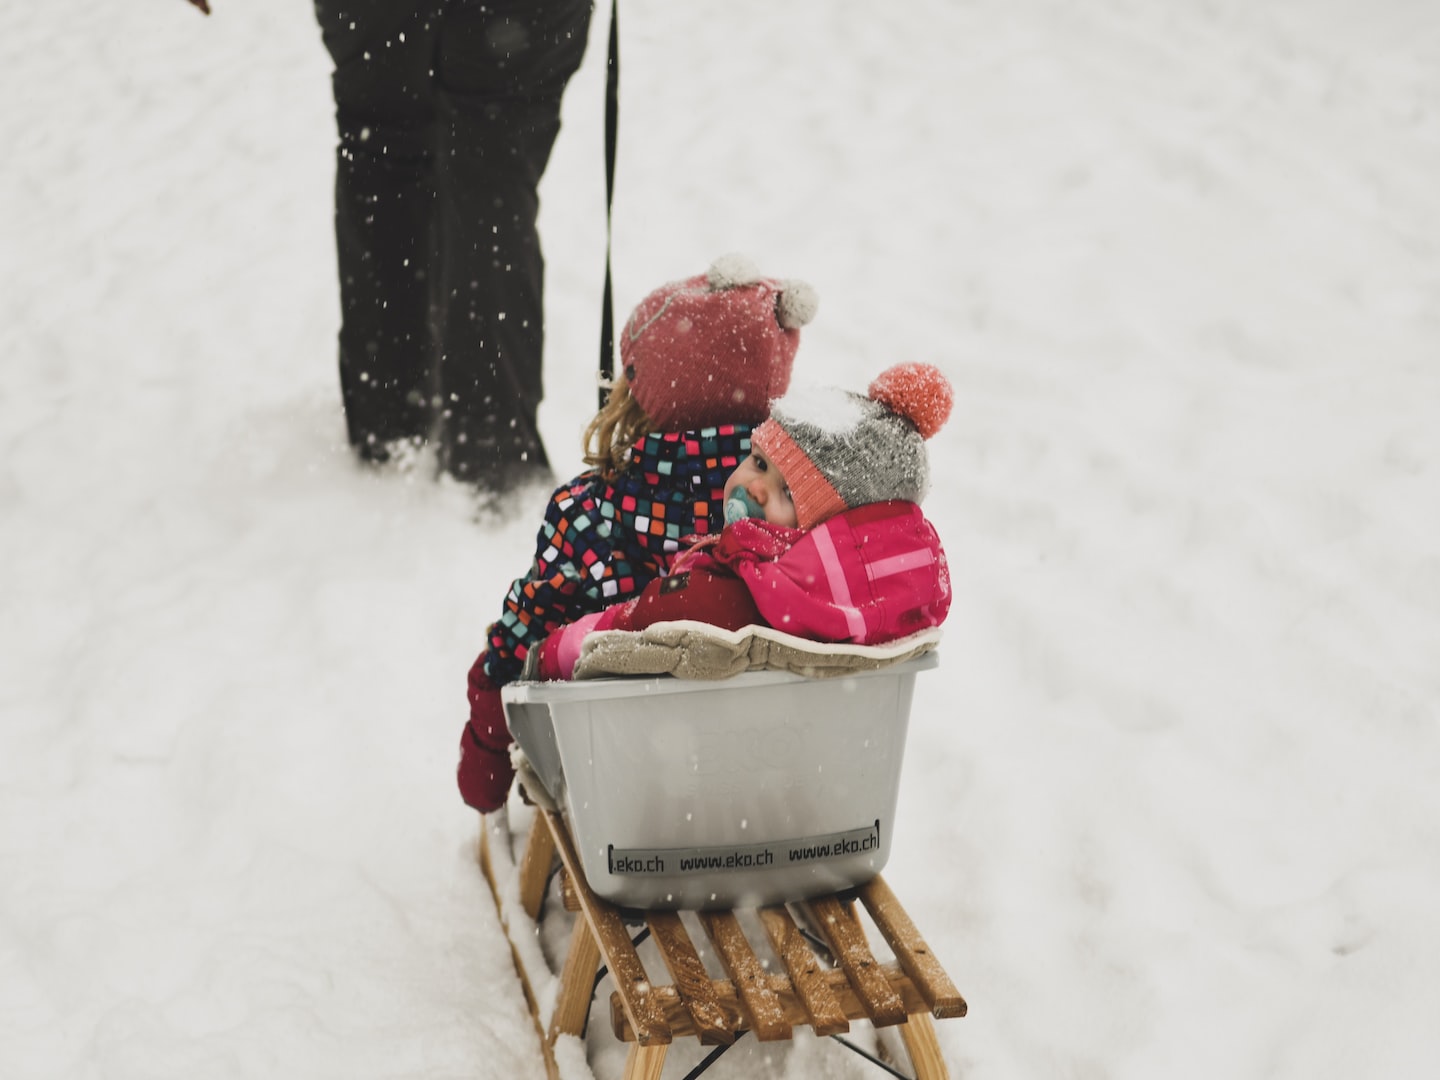 20 of the Absolute Best Snow Day Activities for Toddlers